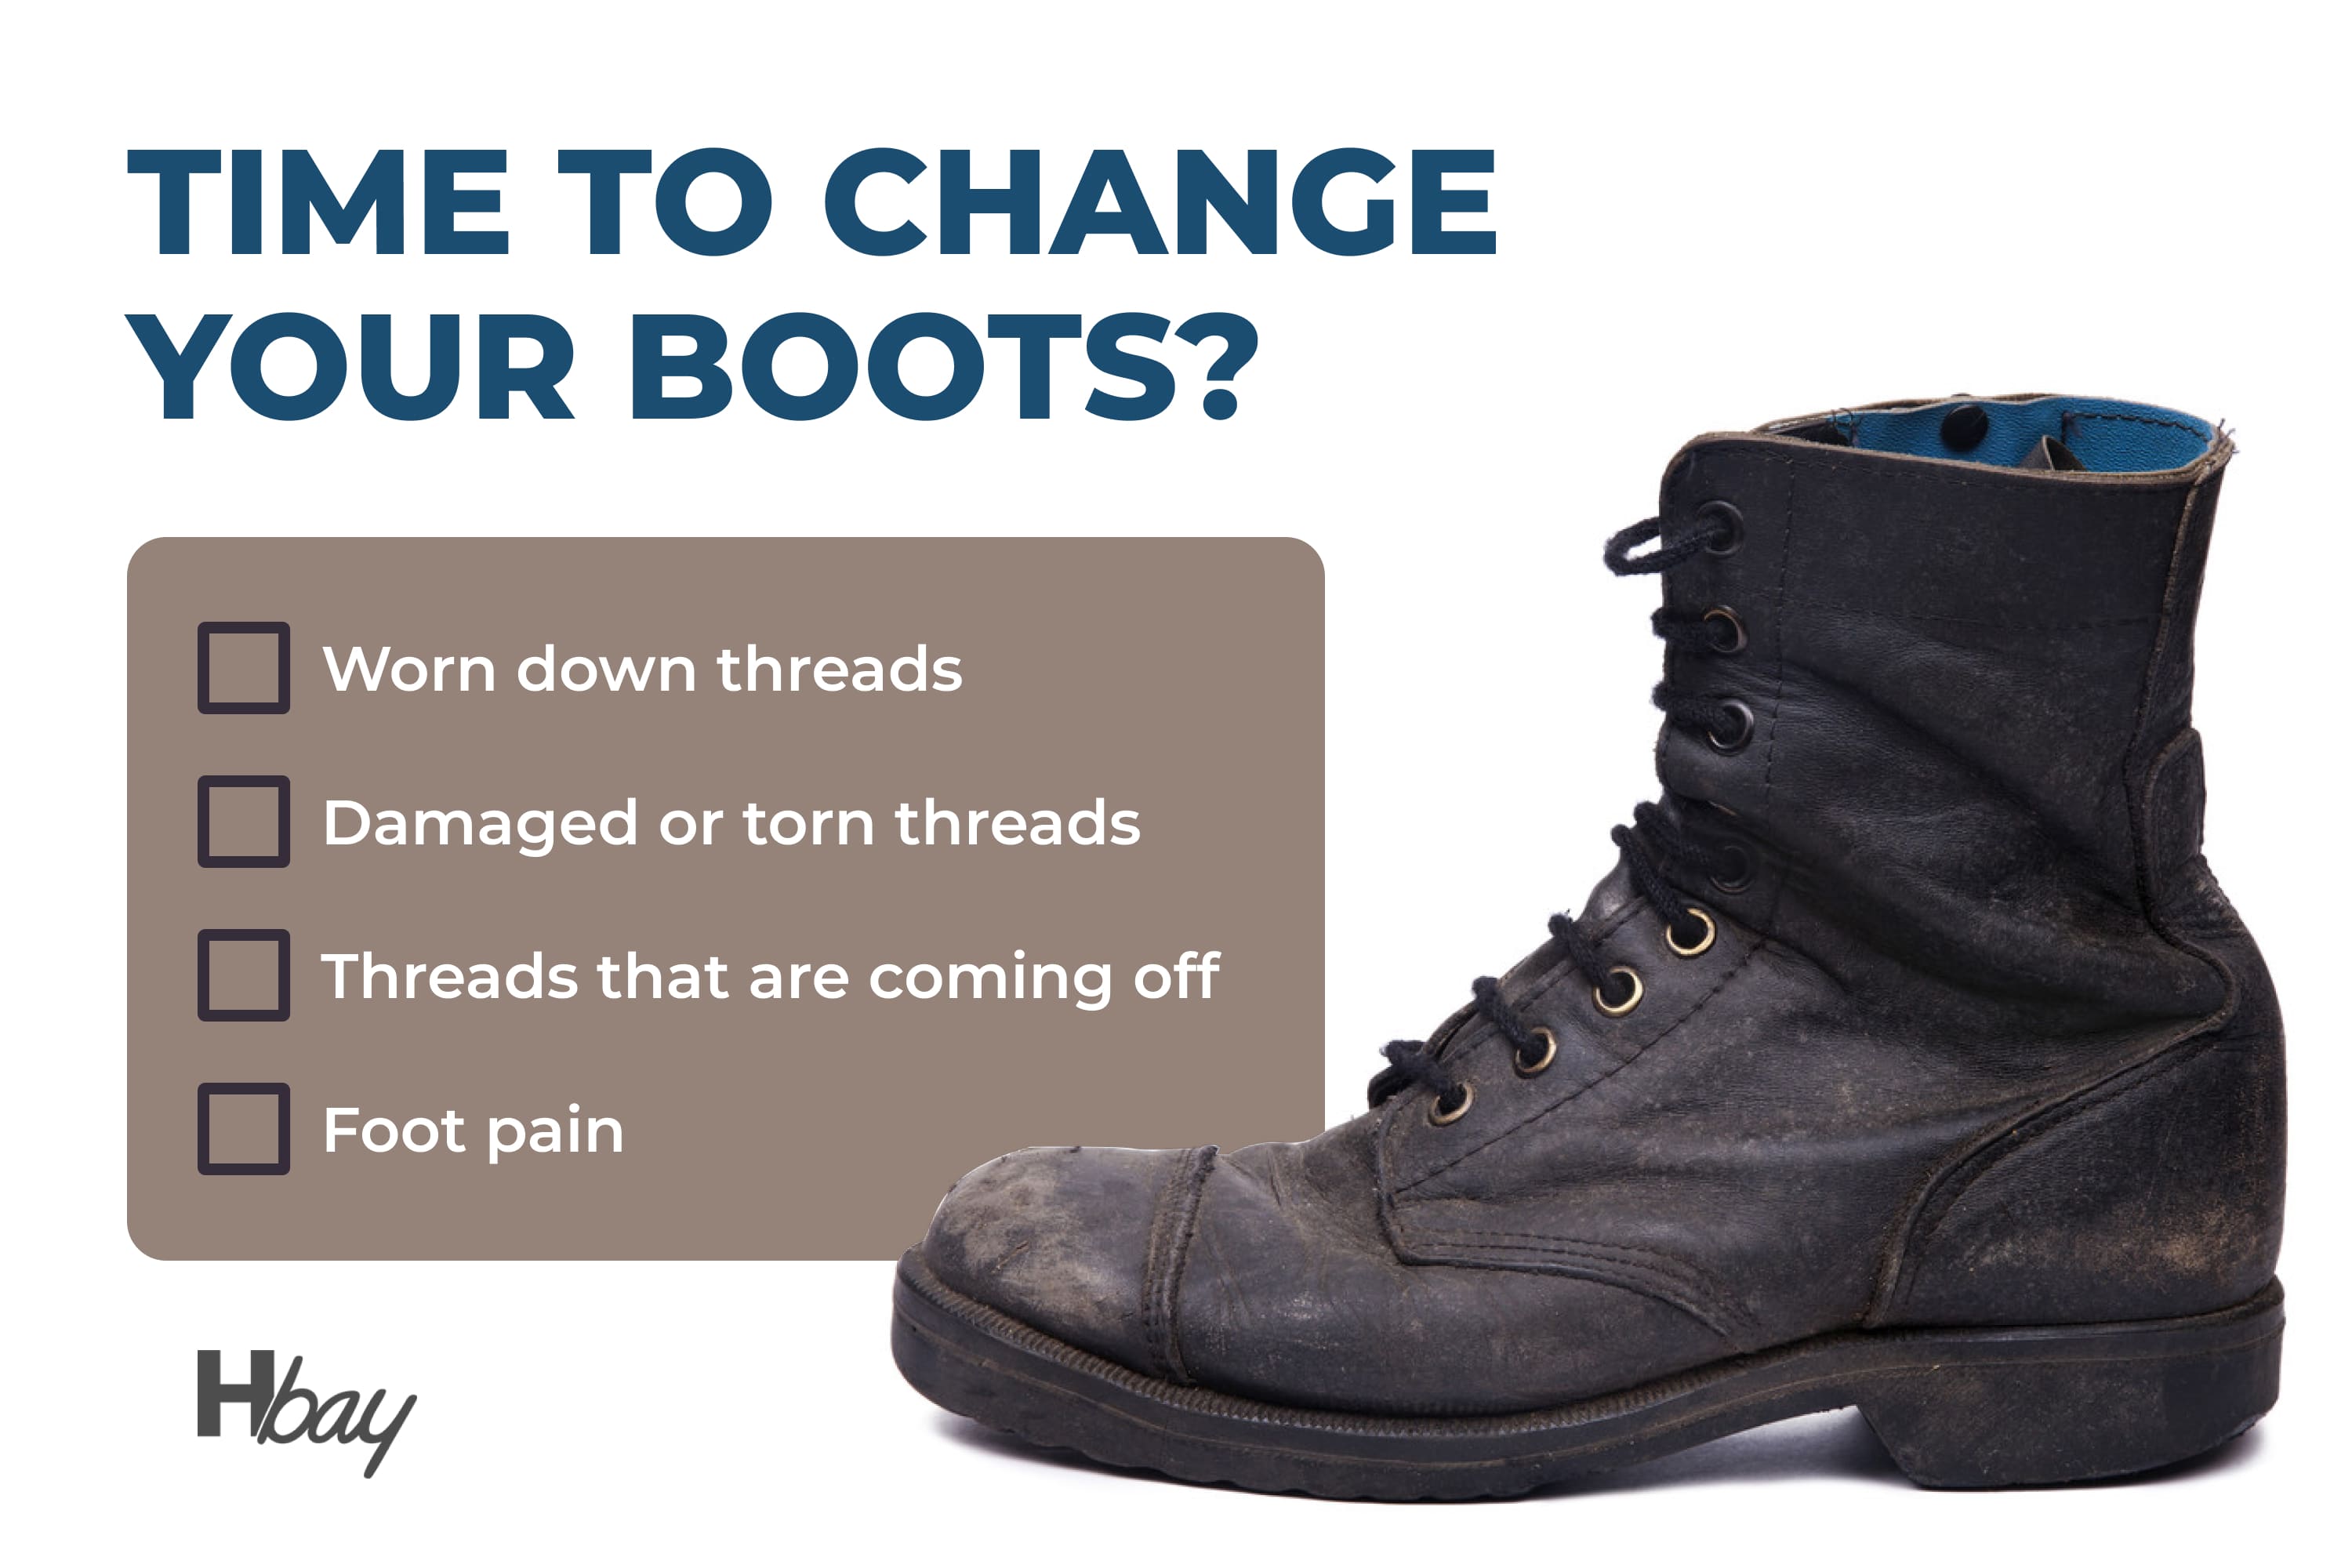 Time to change your boots